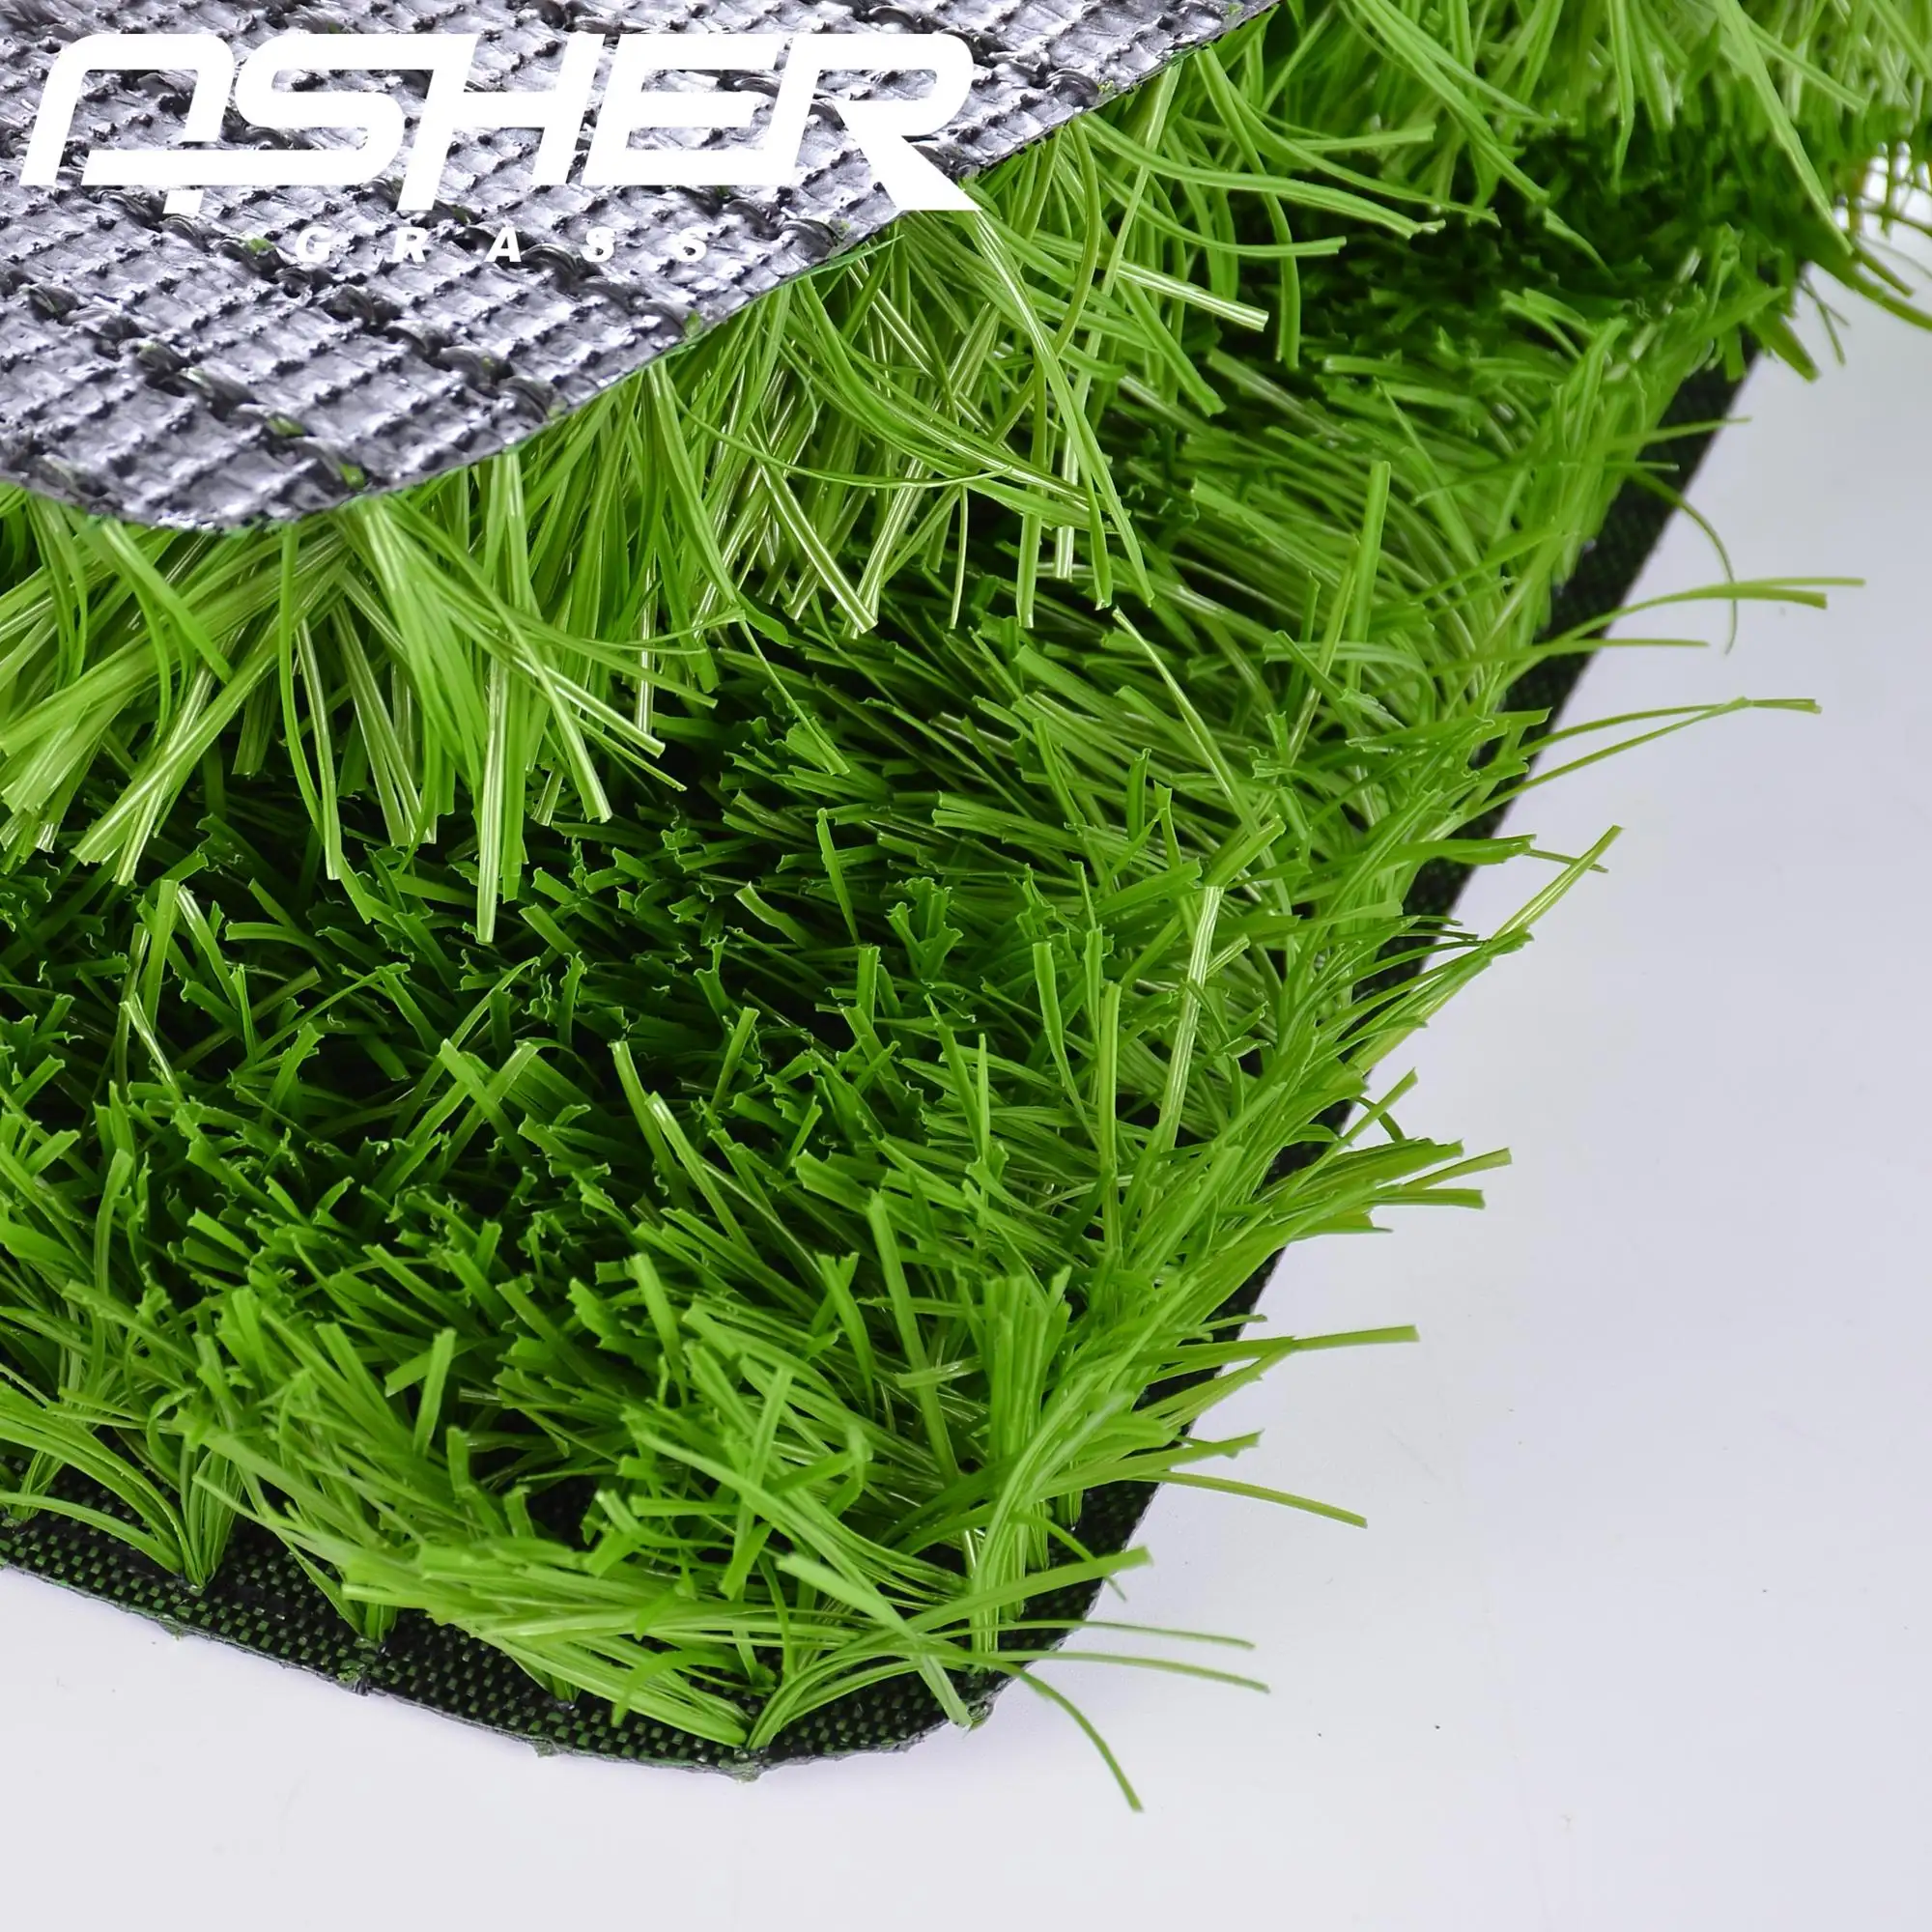 ASHER GRASS 50MM football grass suit for training ground long useful life outdoor synthetic grass/soccer field